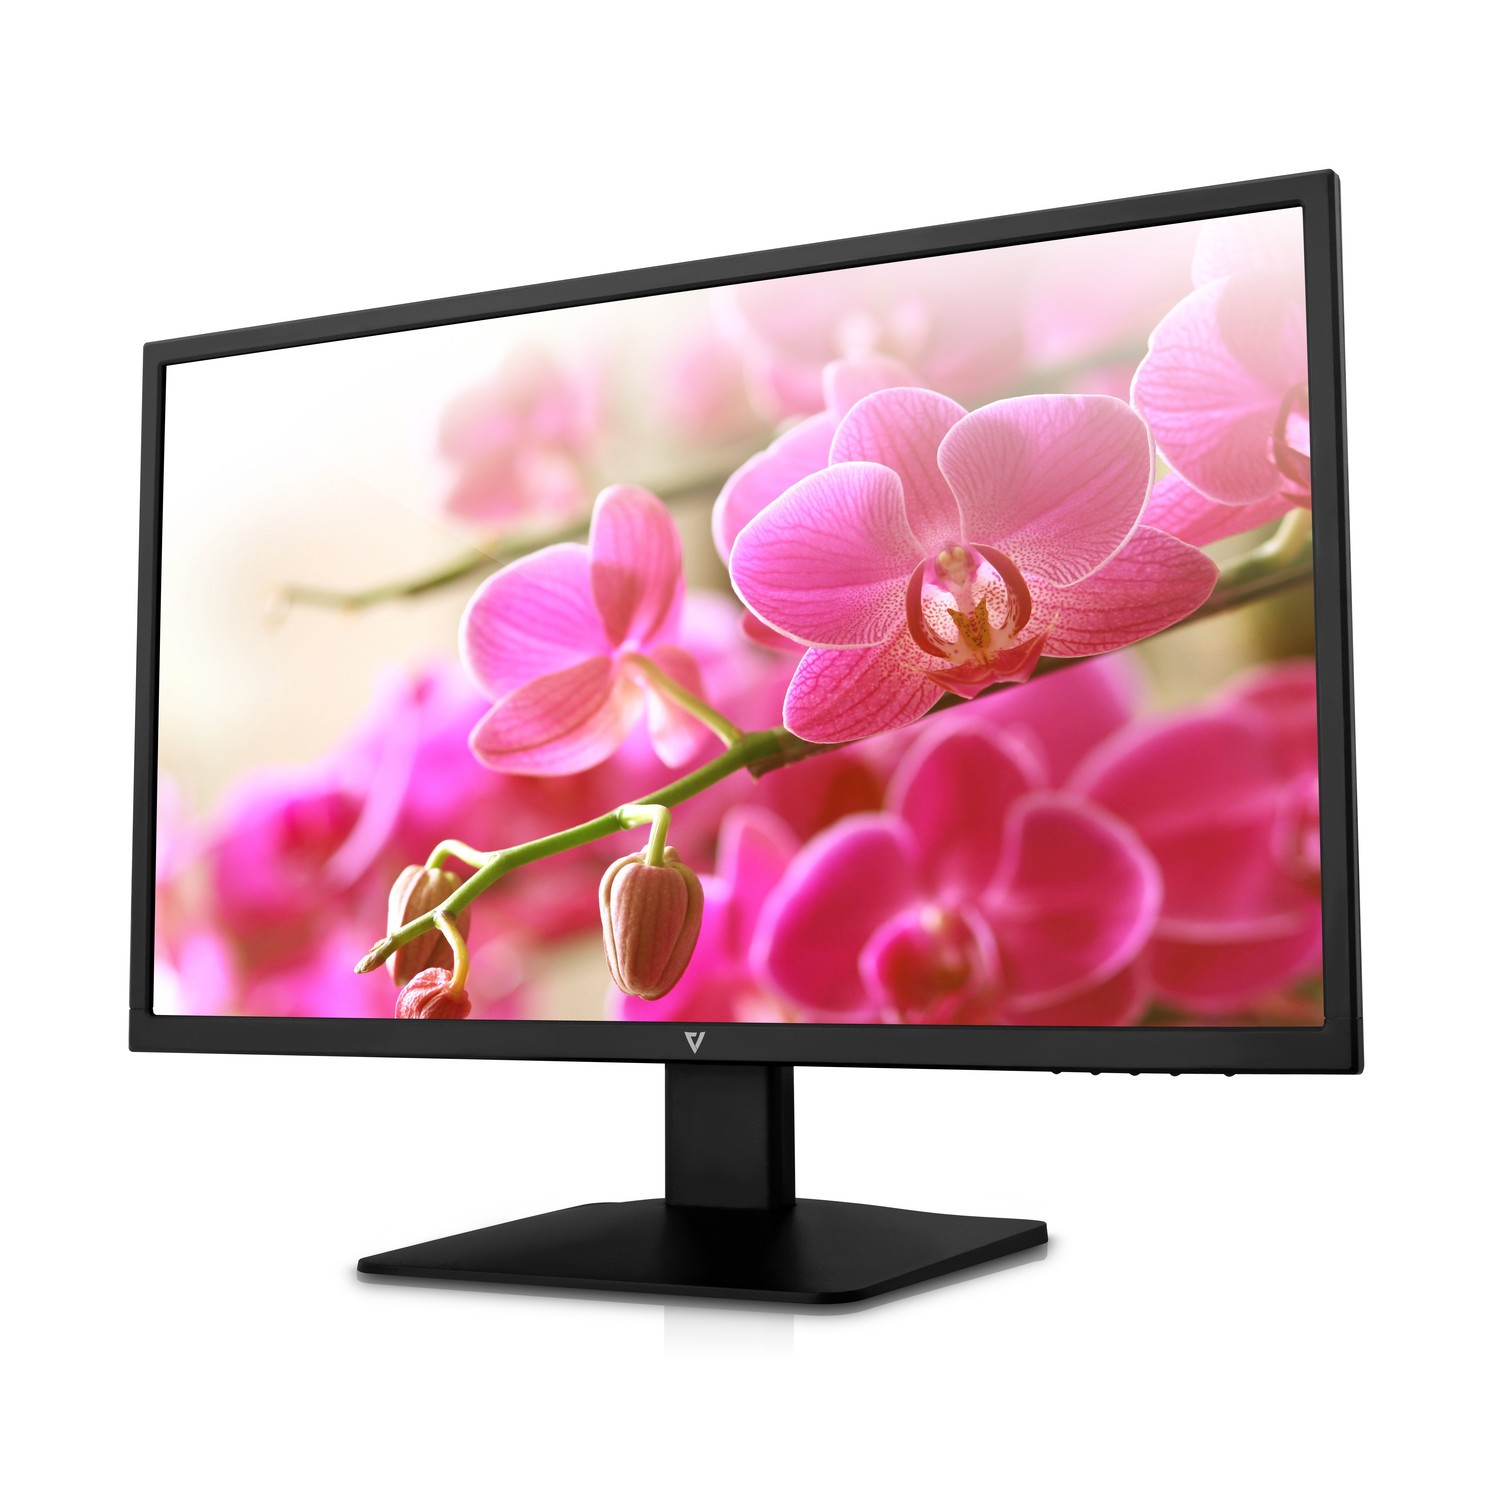 the monitor with a flower image as screen facing left